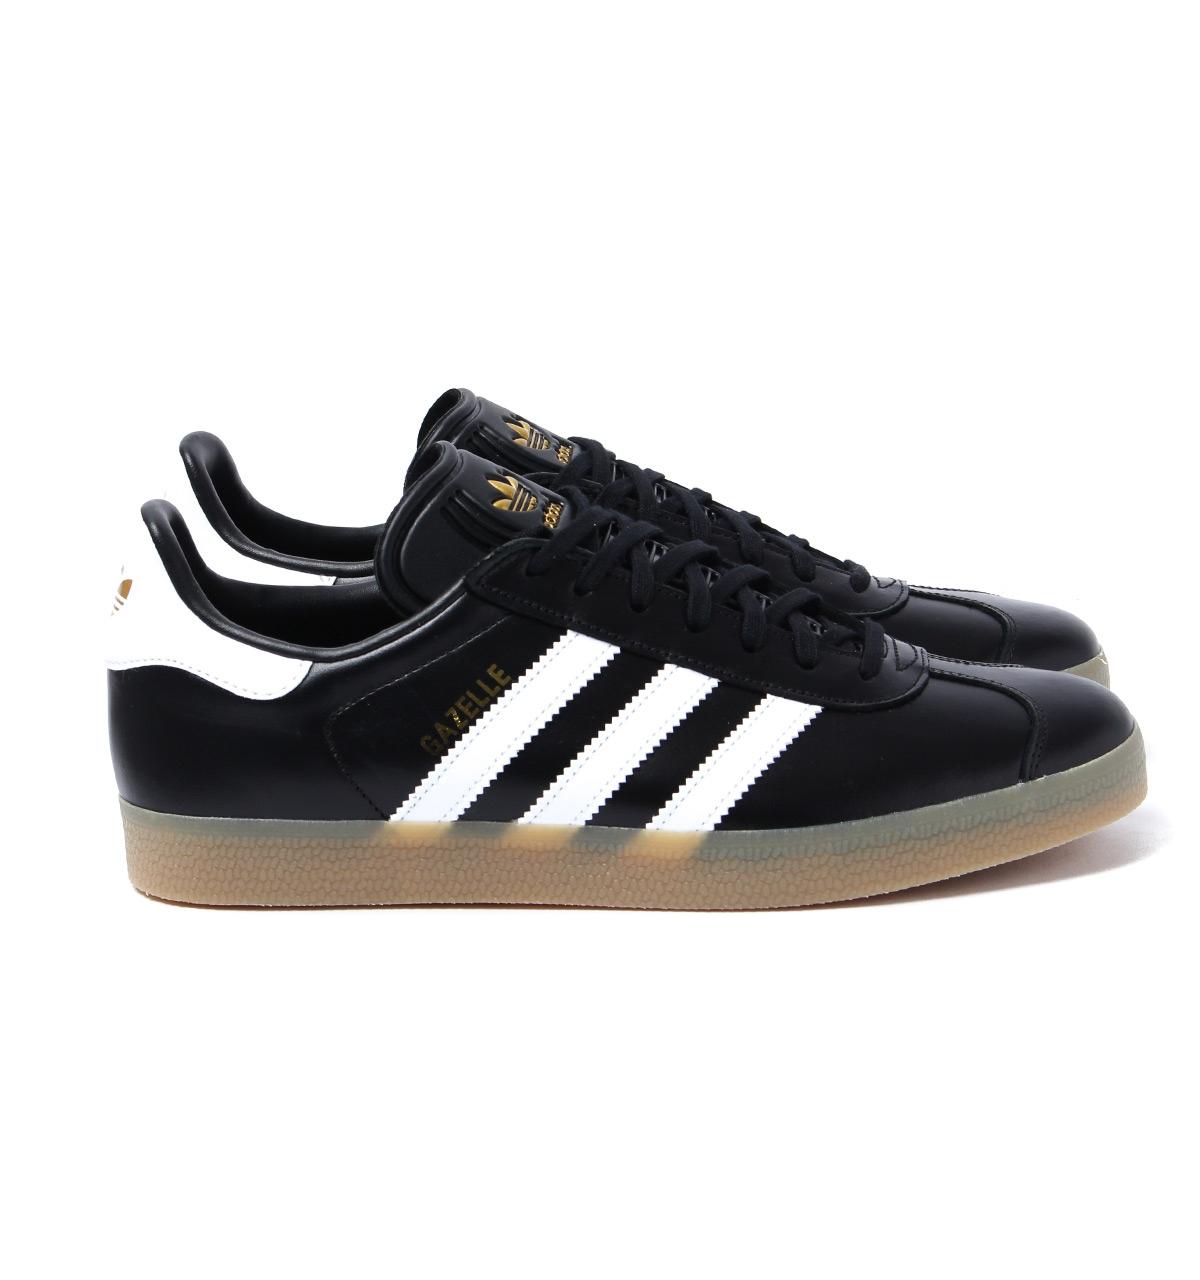 Money rubber Intact Windswept adidas Originals Leather Black & Gold Gazelle Trainers for Men | Lyst